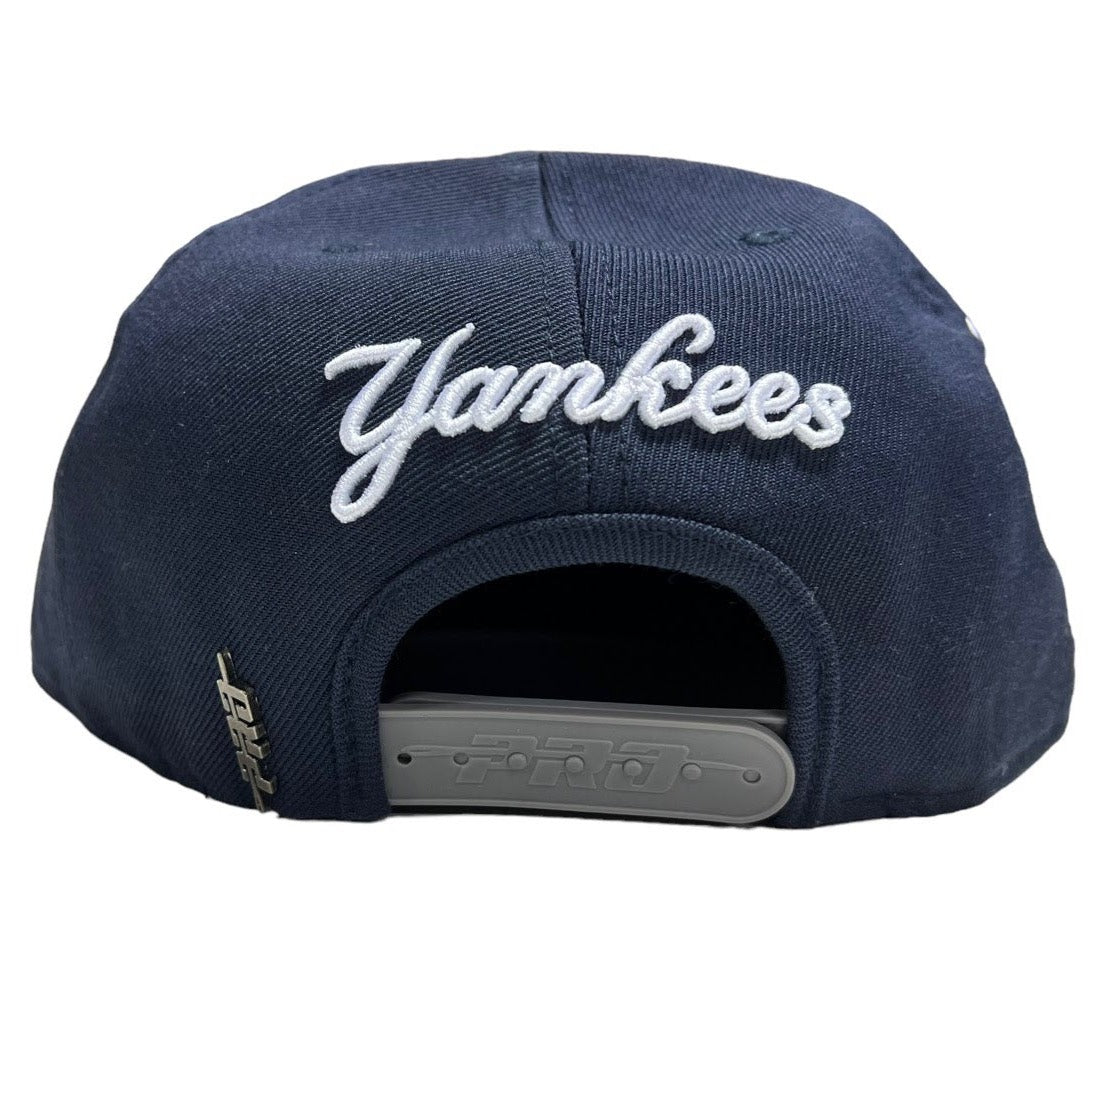 Official Men's New York Yankees Pro Standard Gear, Mens Pro Standard Yankees  Apparel, Guys Pro Standard Clothes